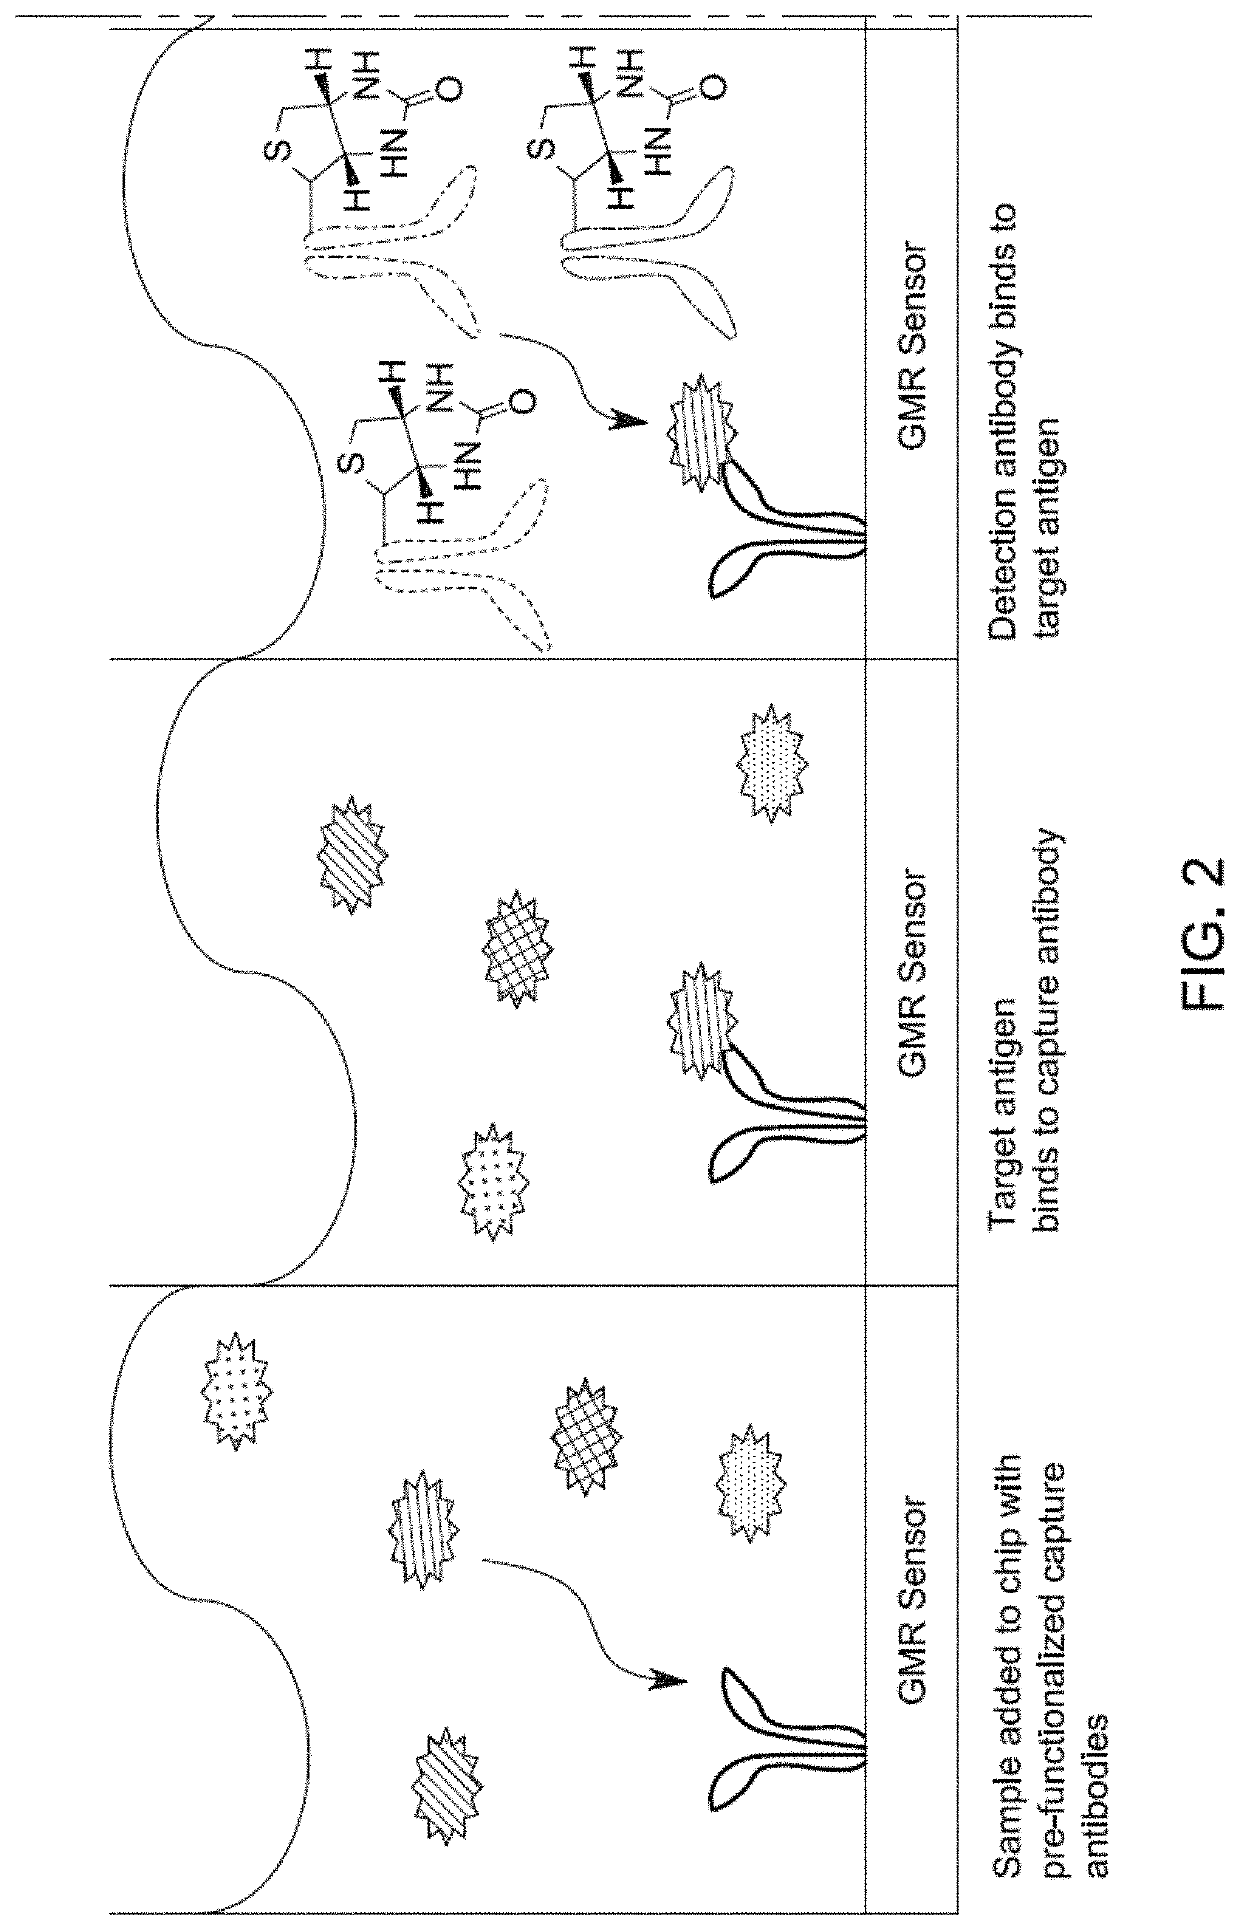 Systems and Methods for Measuring Binding Kinetics of Analytes in Complex Solutions